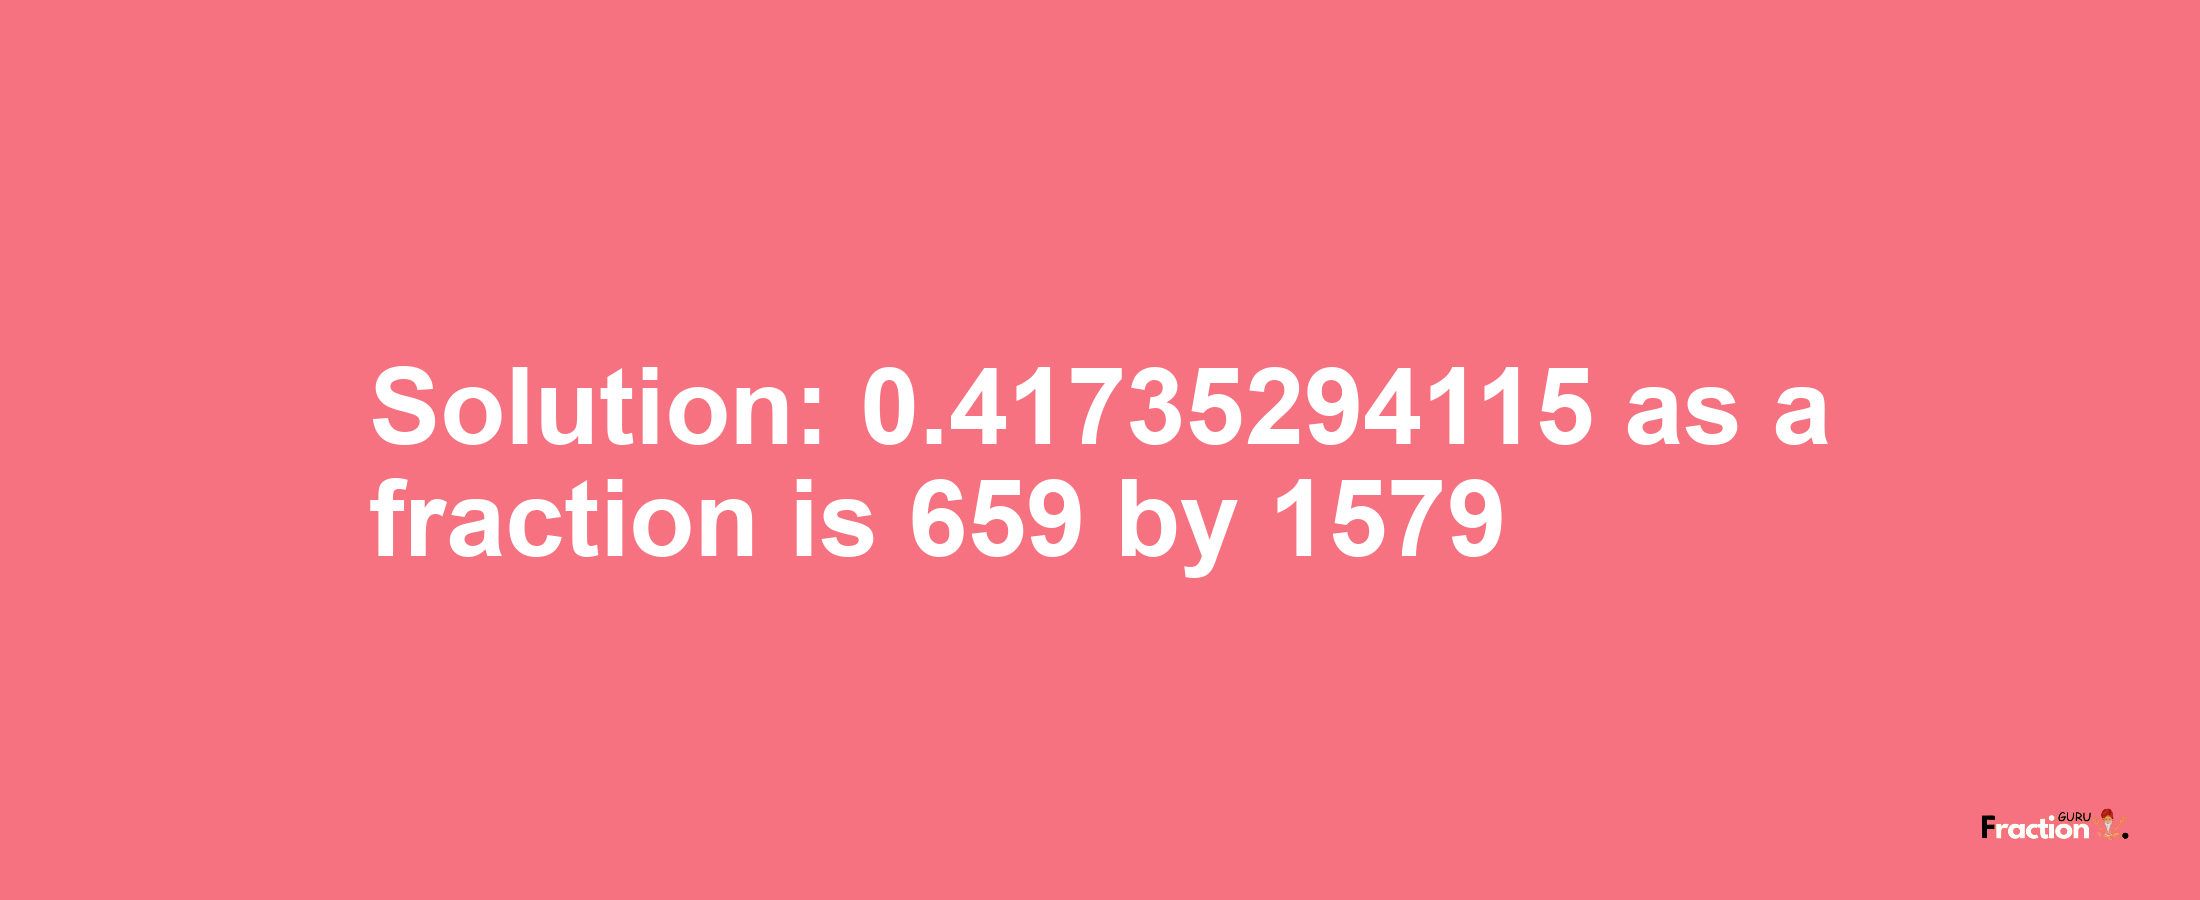 Solution:0.41735294115 as a fraction is 659/1579